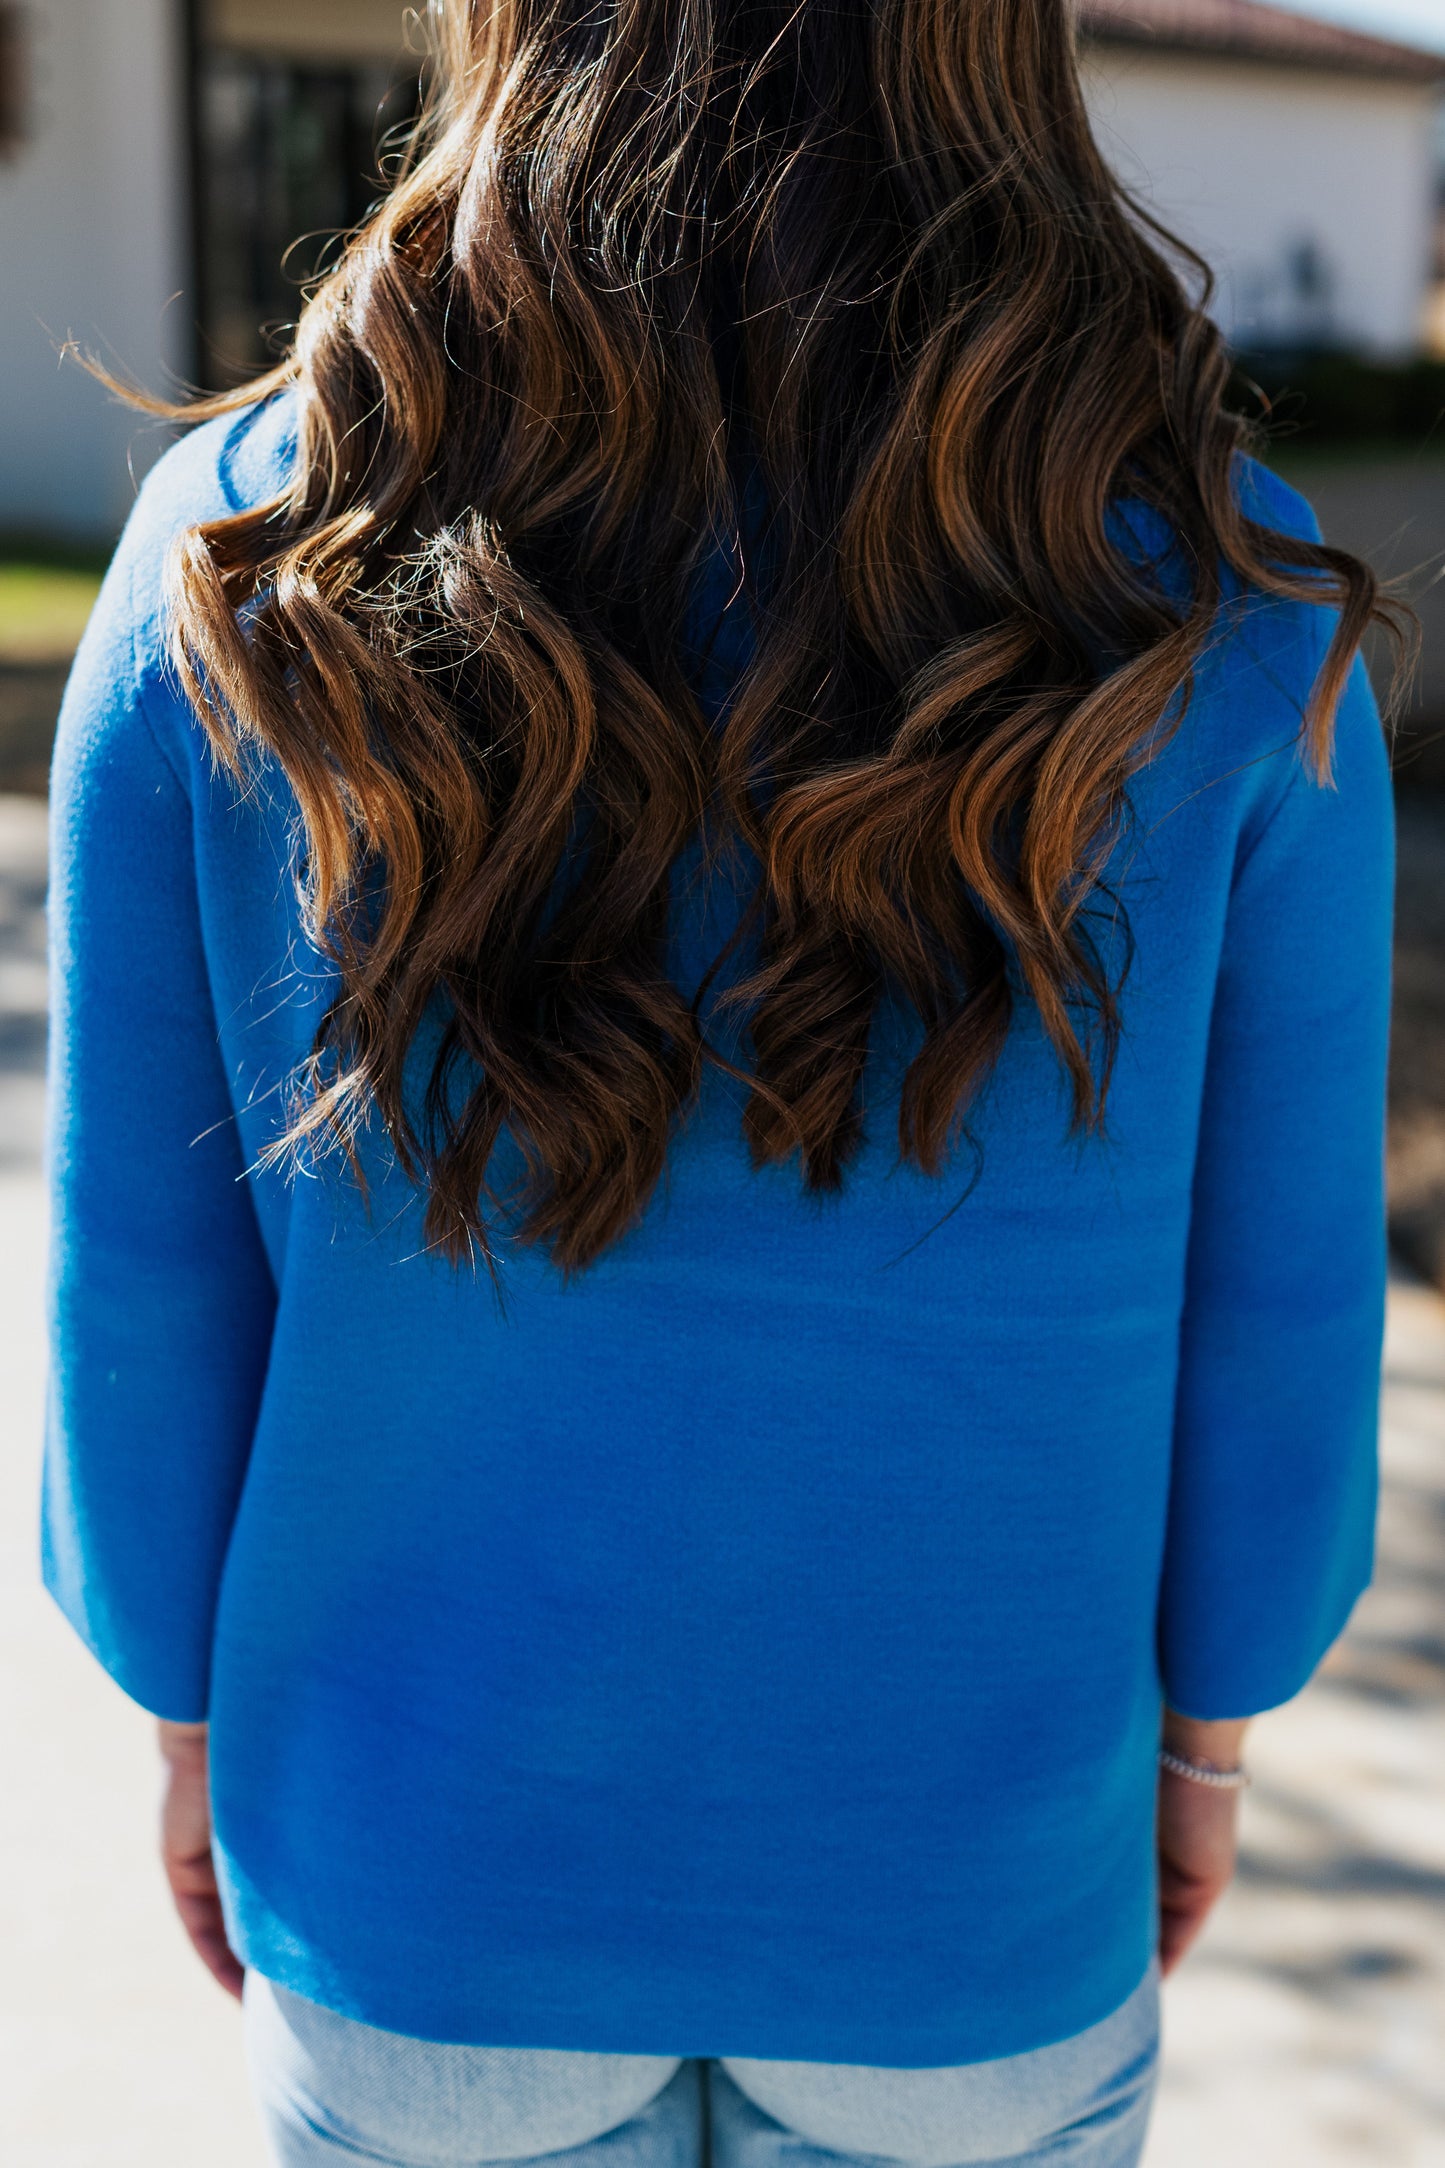 BELL SLEEVE SWEATER: FRENCH BLUE